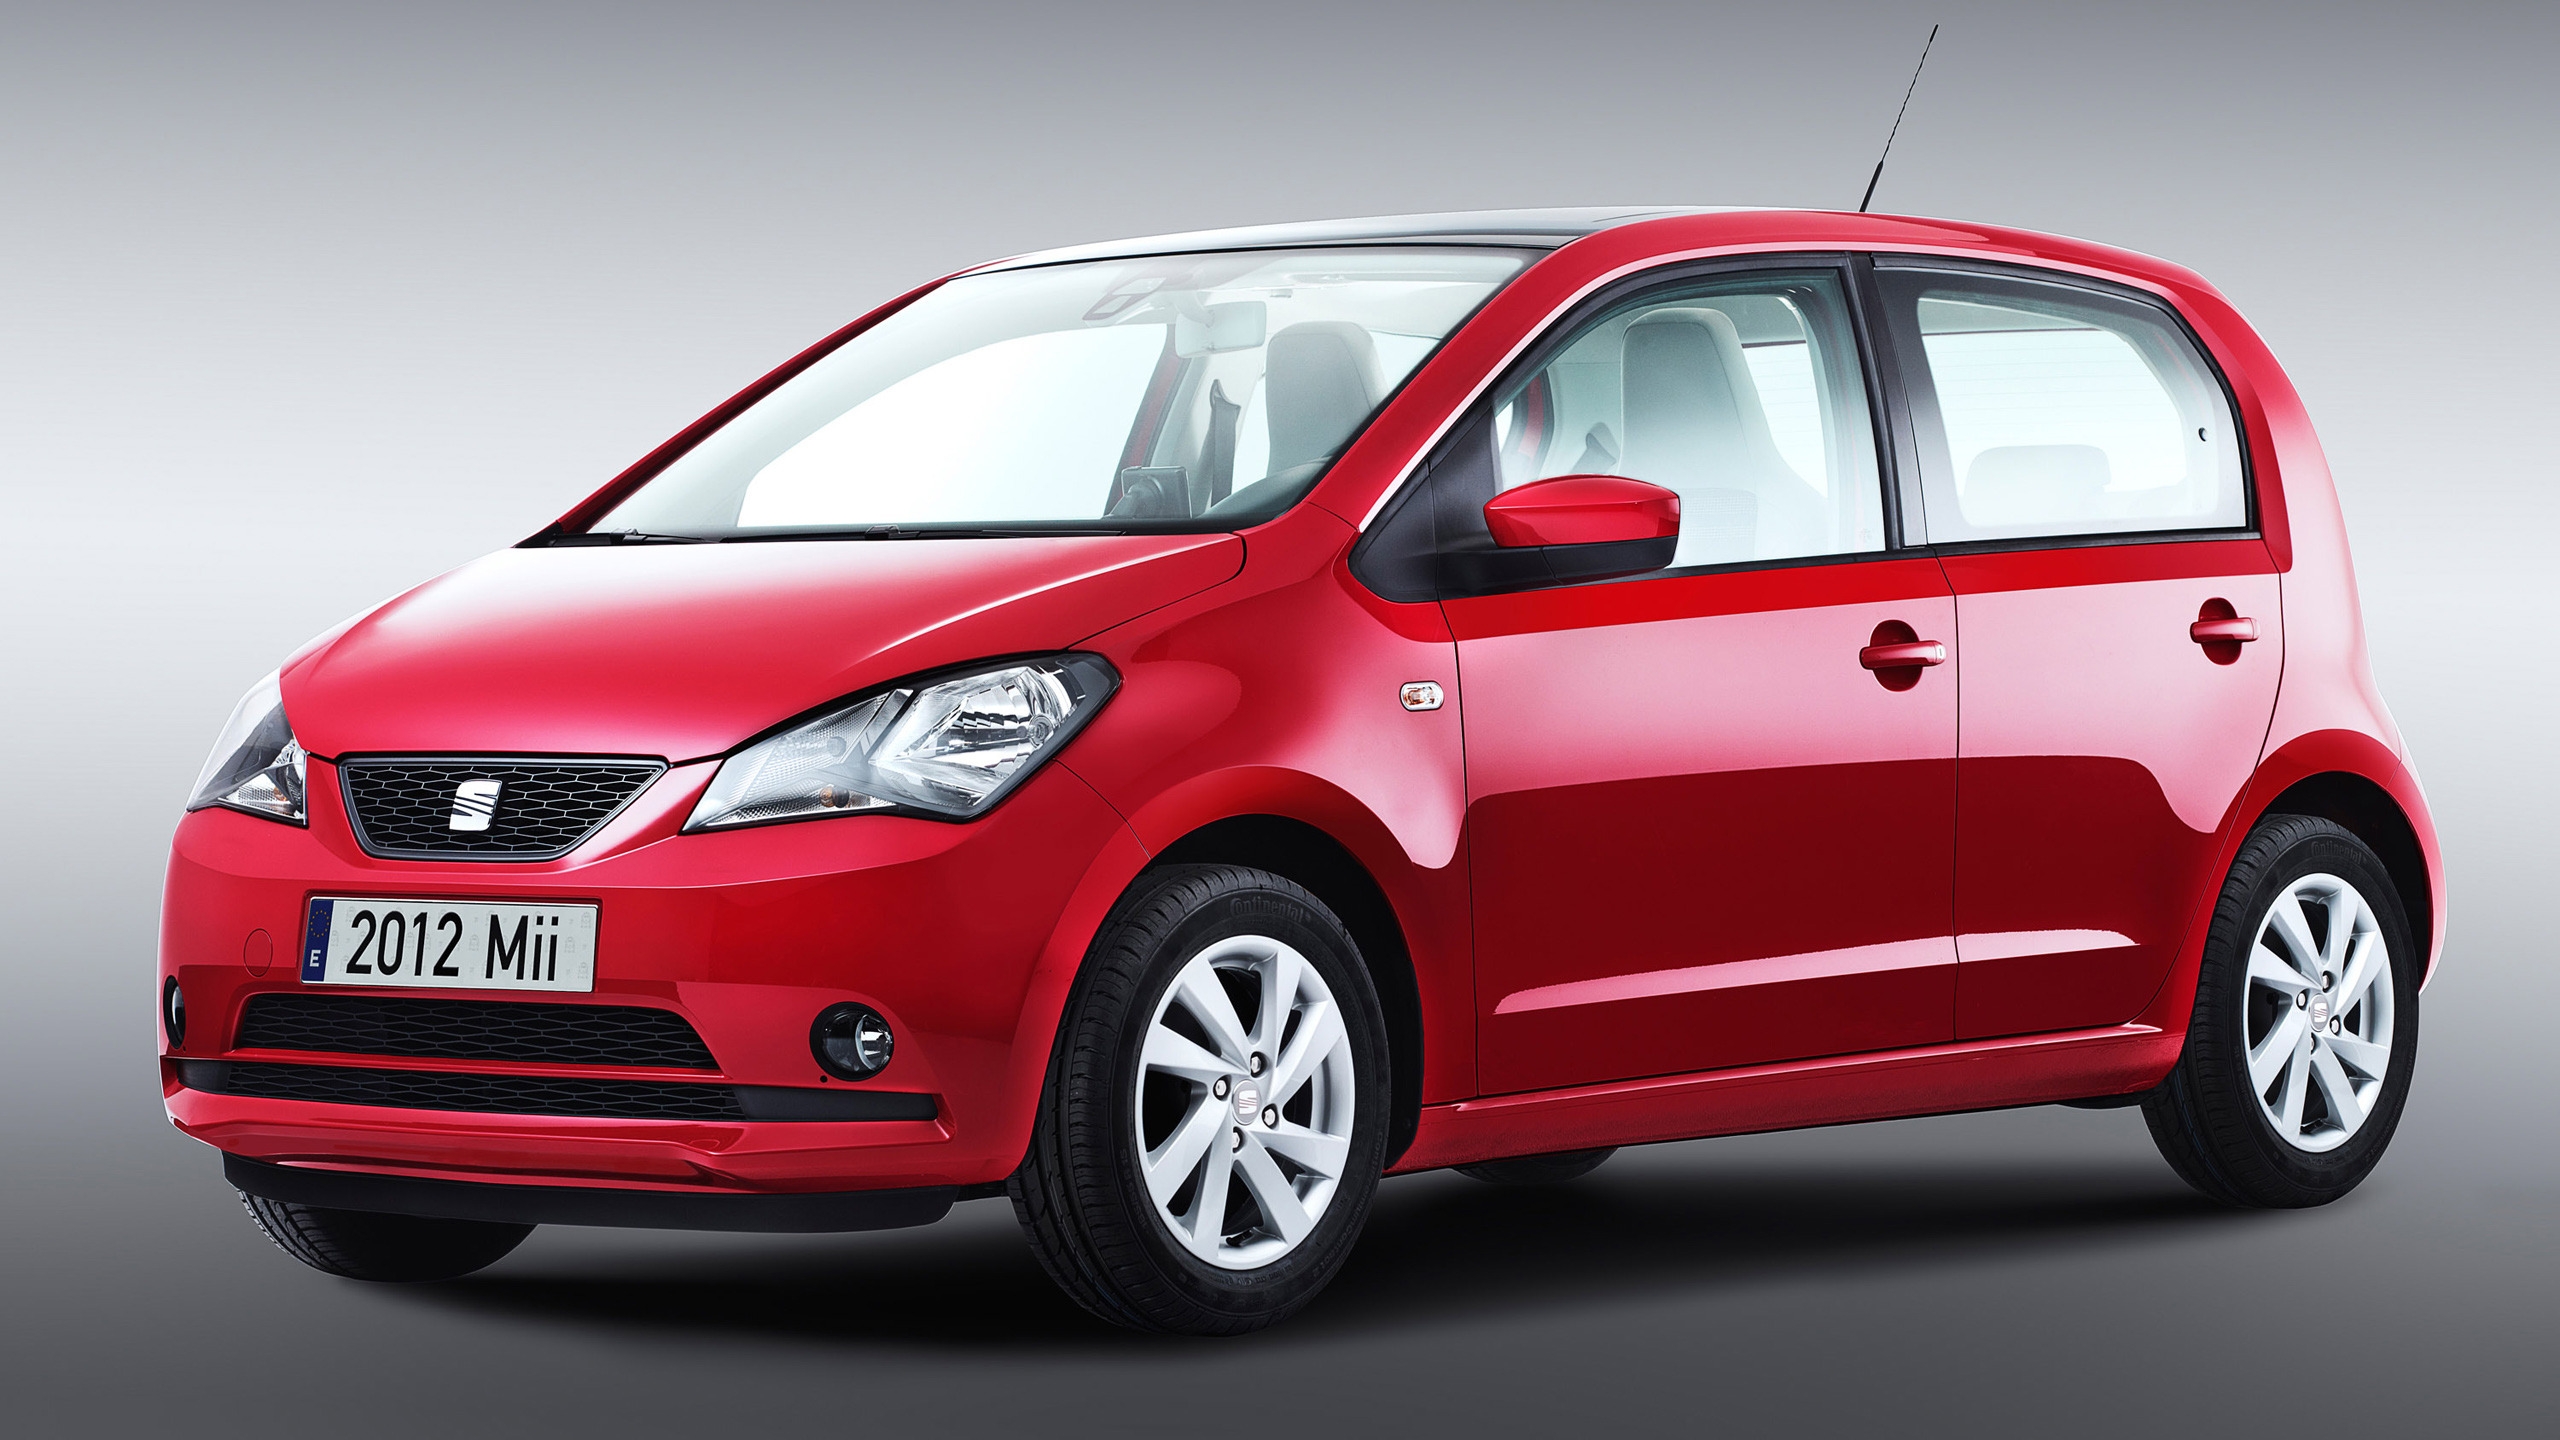 Red Seat Mii Model 2012 for 2560x1440 HDTV resolution